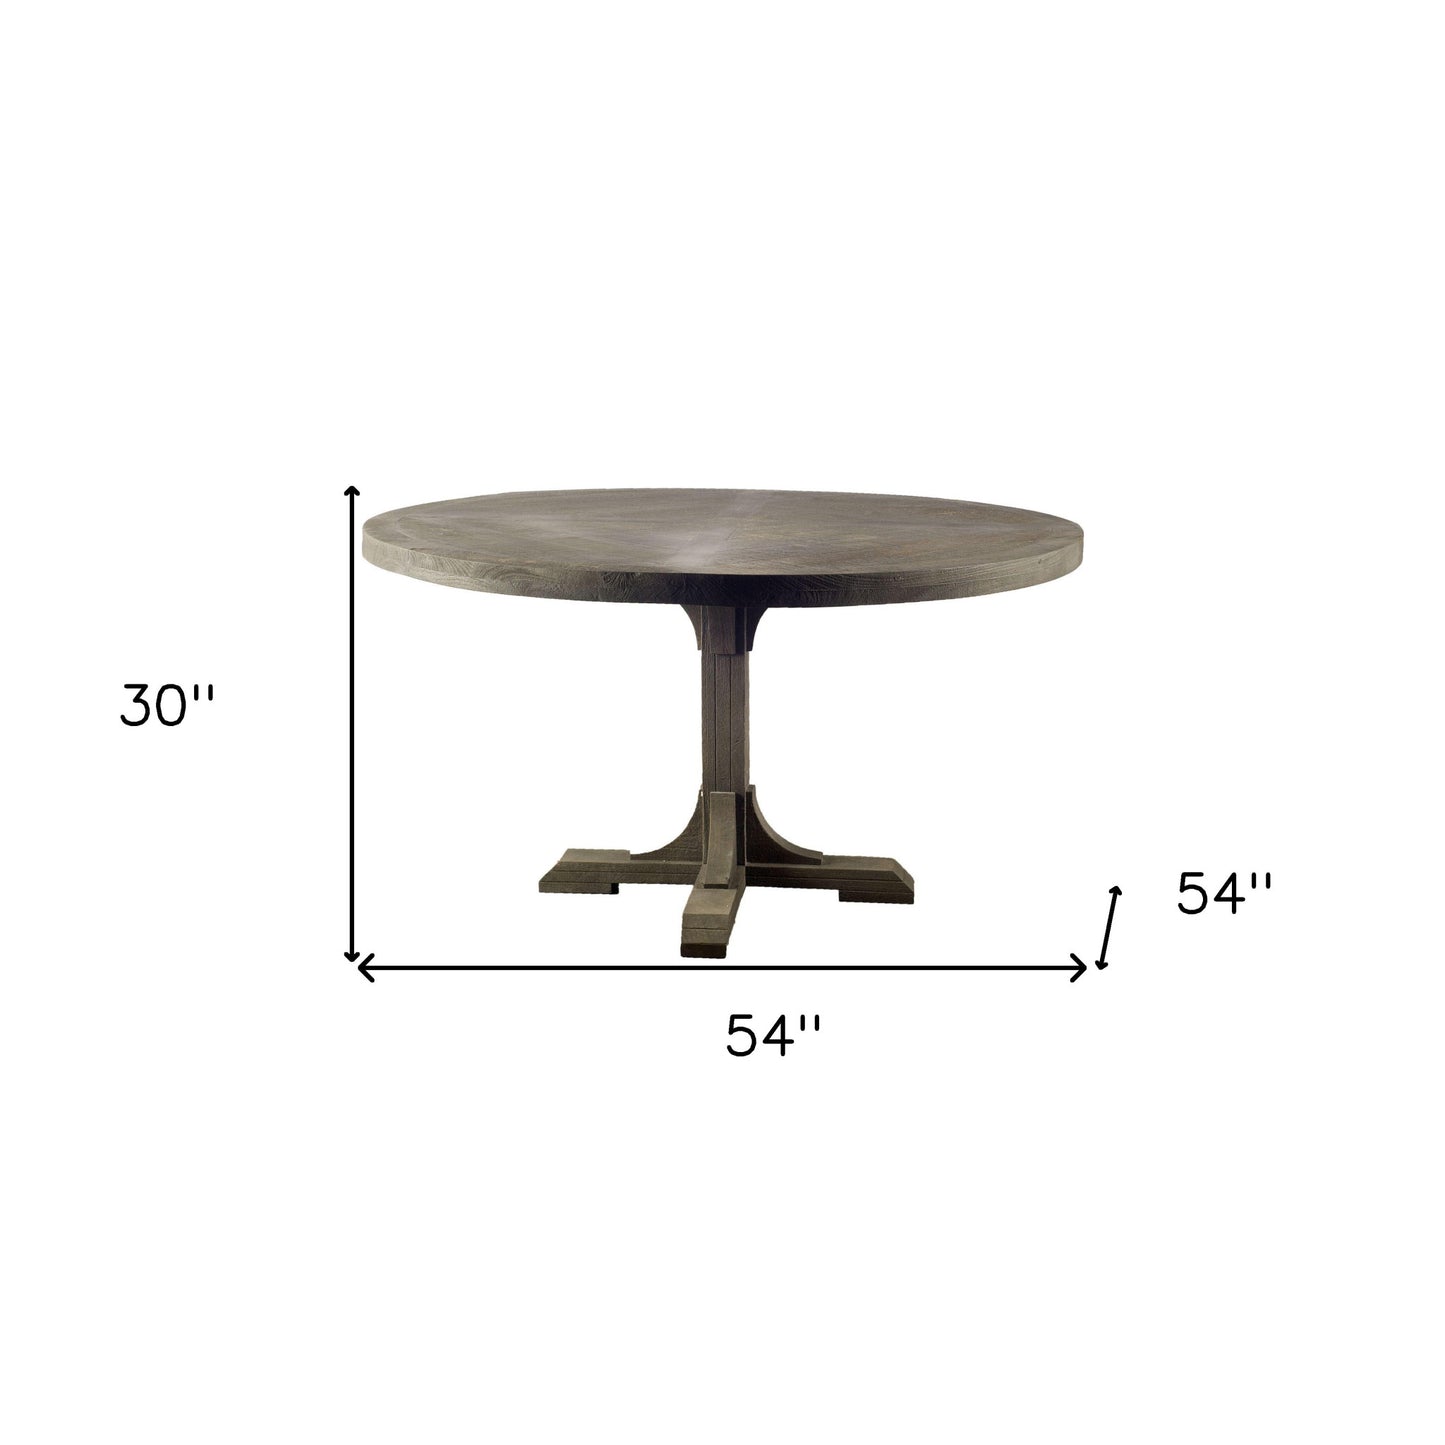 54" Circular Solid Wood Top With Pedestal Style Base Dining Table